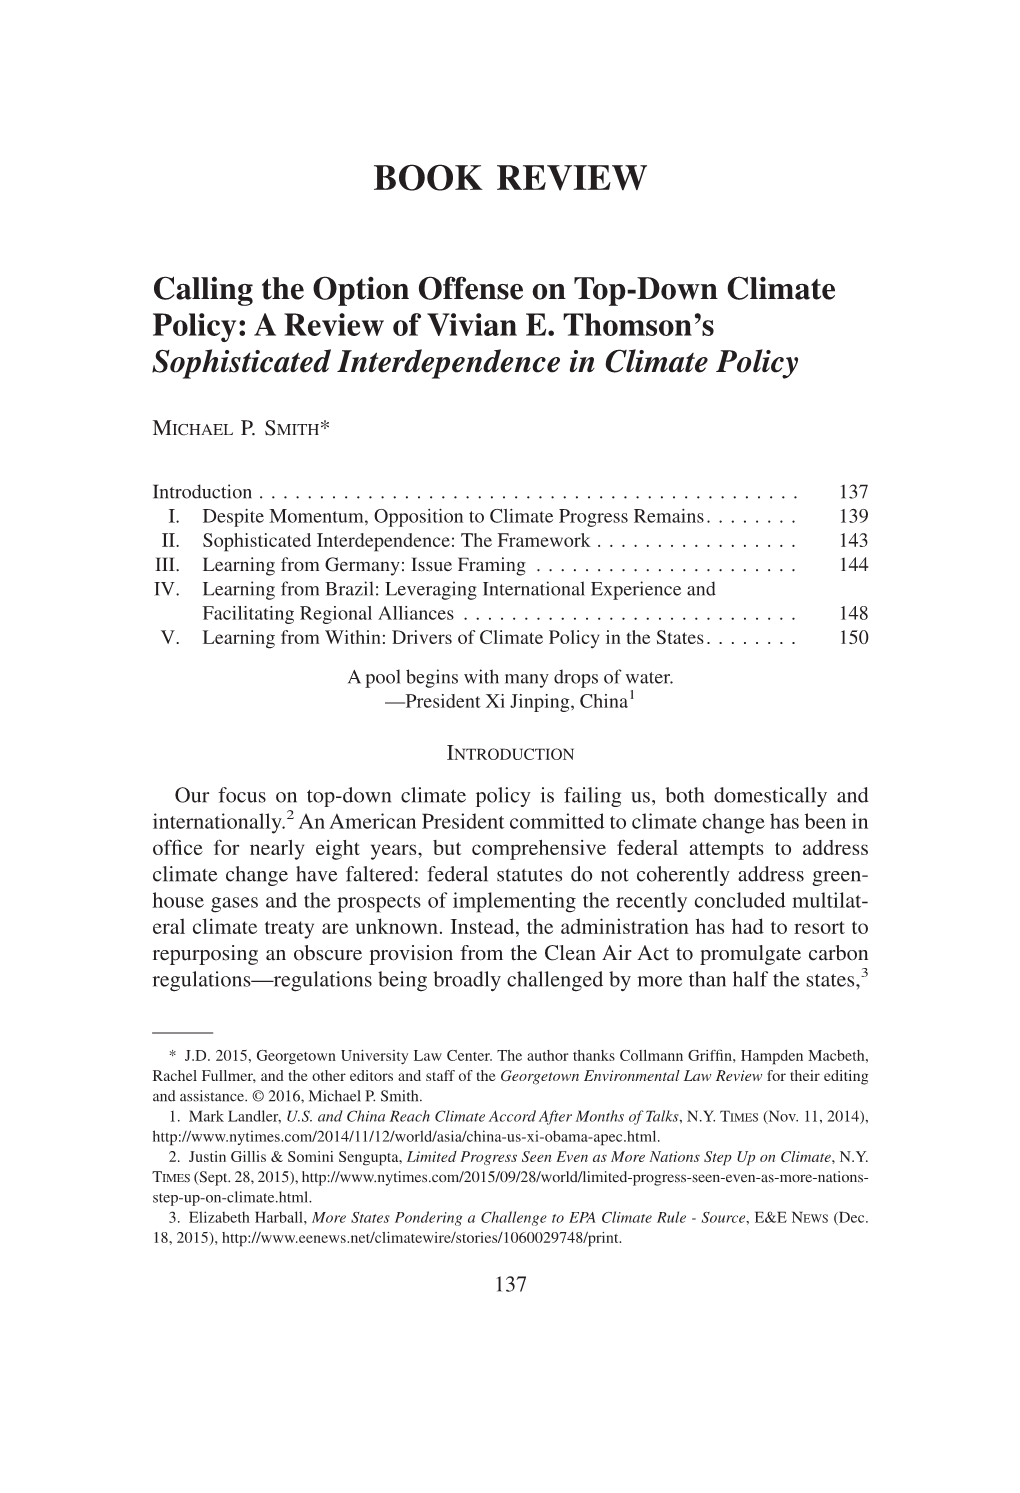 Calling the Option Offense on Top-Down Climate Policy: a Review of Vivian E